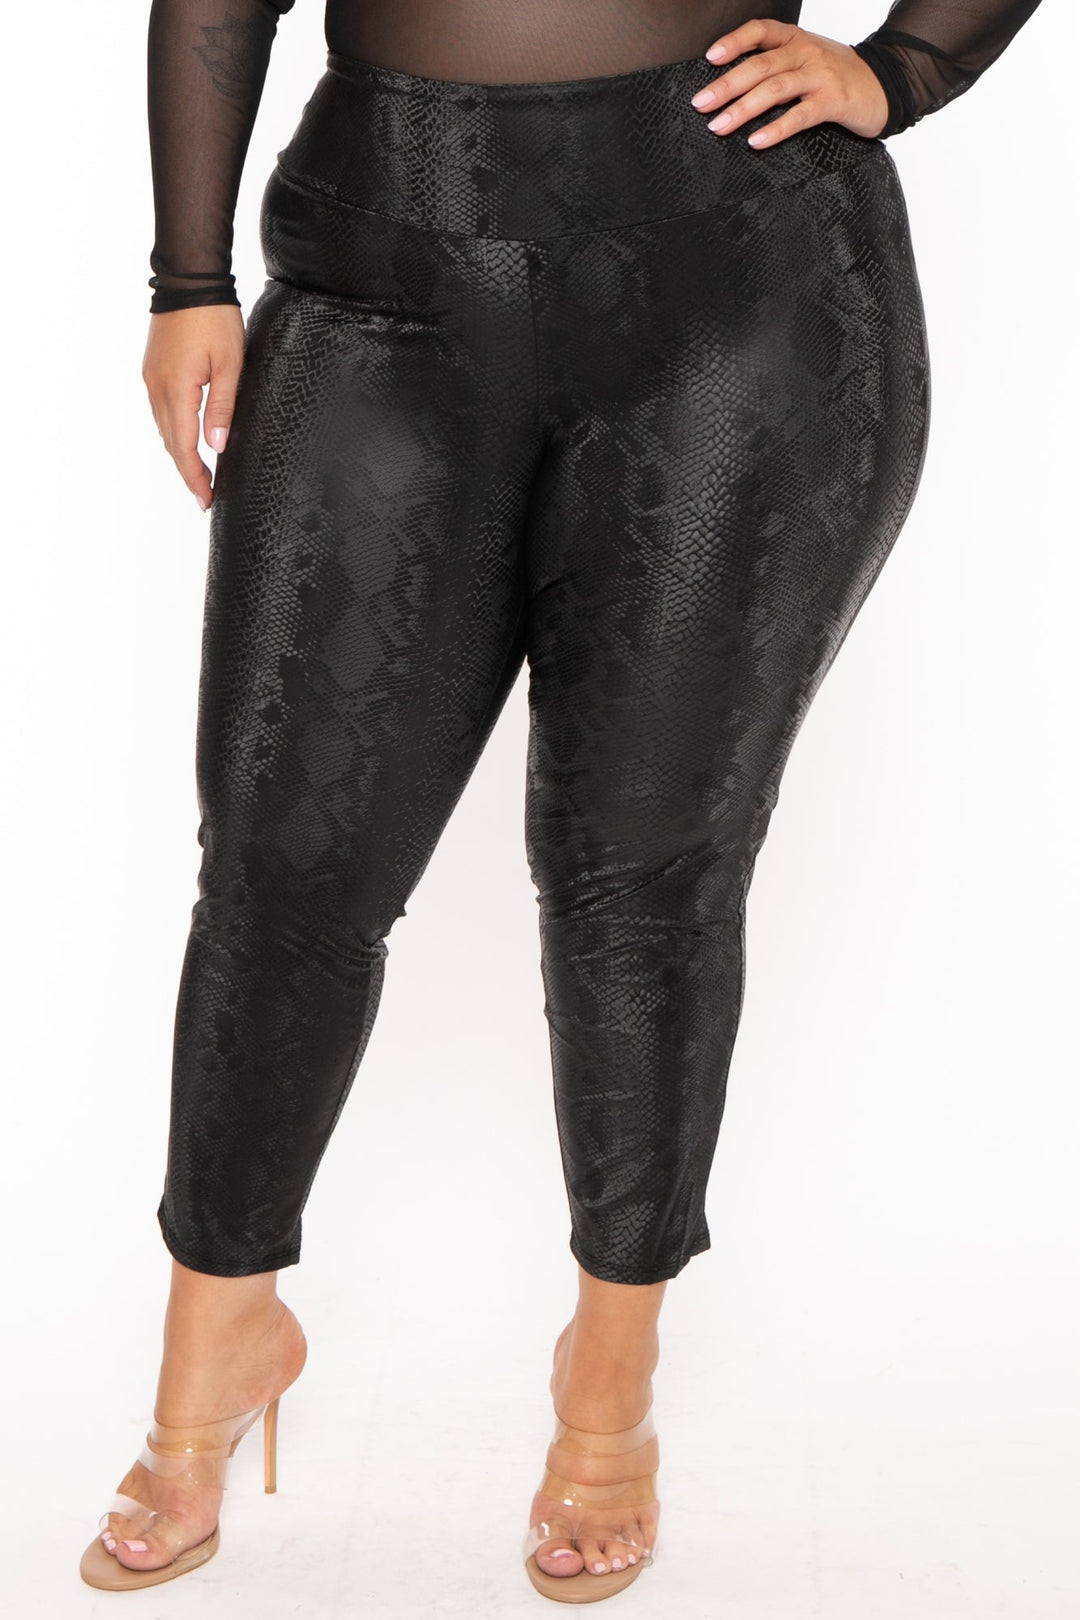 Printed Leggings High Waisted Black and Grey Color with Snake Skin